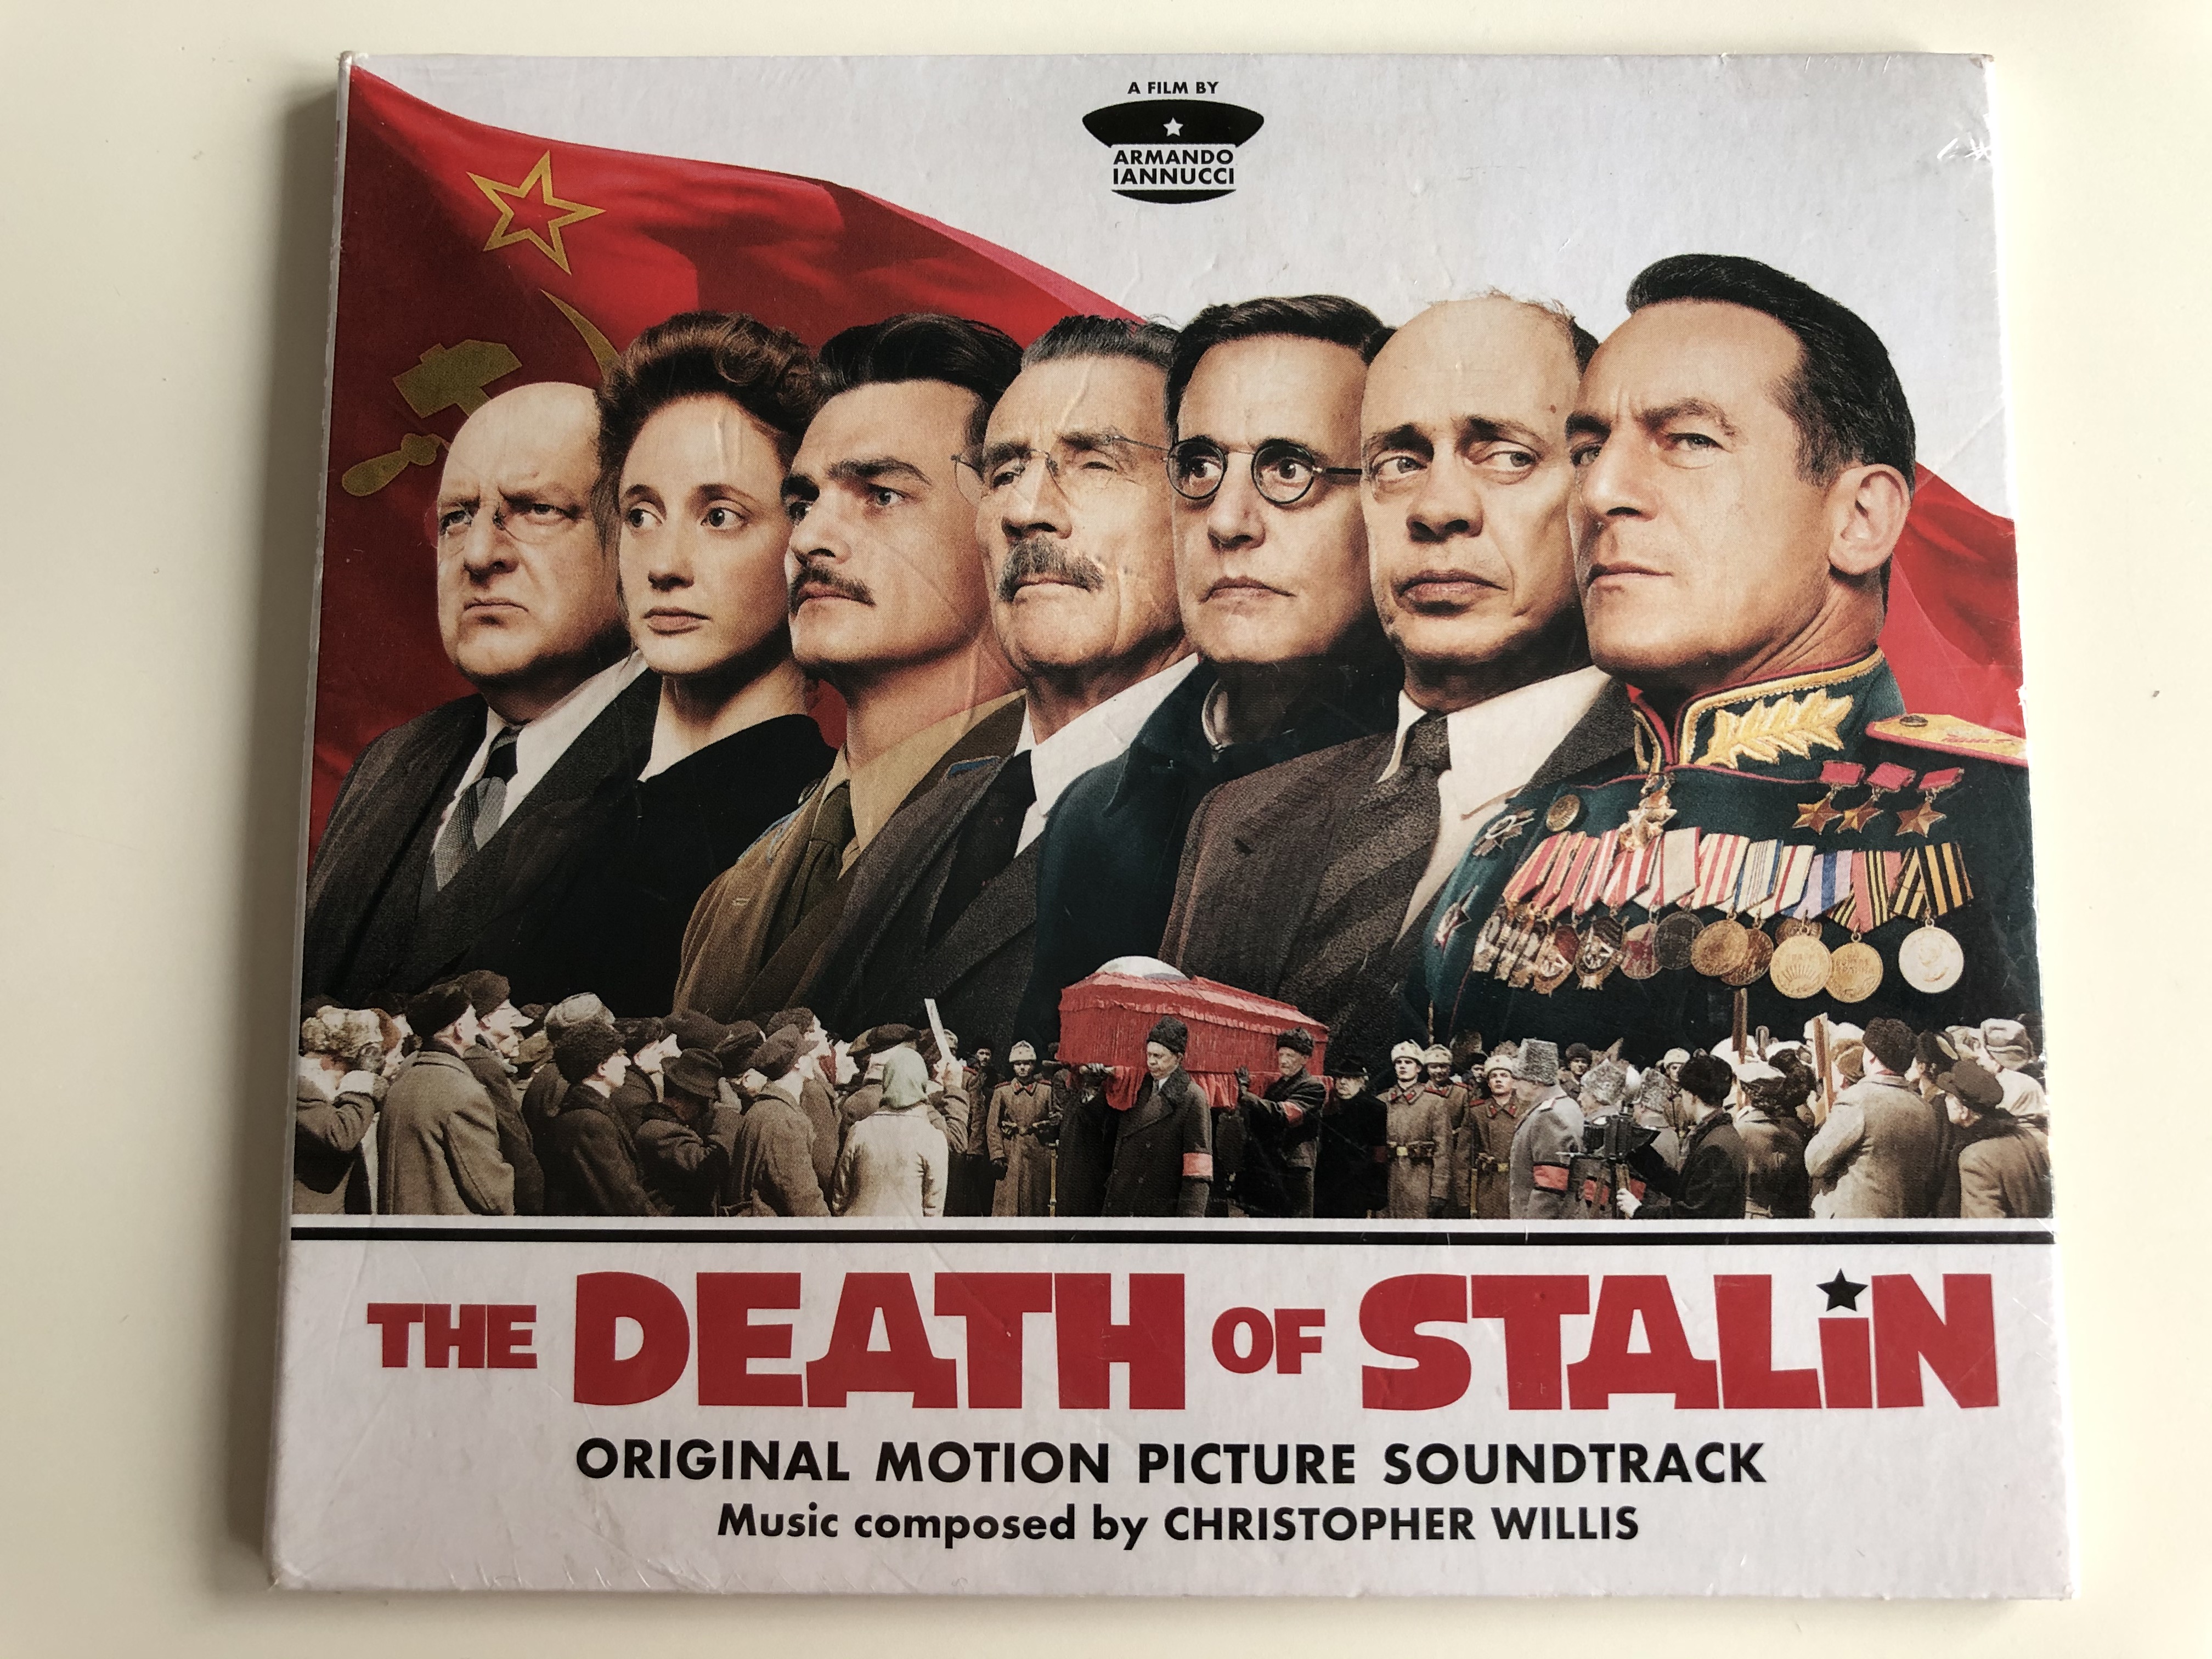 the-death-of-stalin-original-motion-picture-soundtrack-music-composed-by-christopher-willis-mvka-audio-cd-2018-mvlp1016-1-.jpg